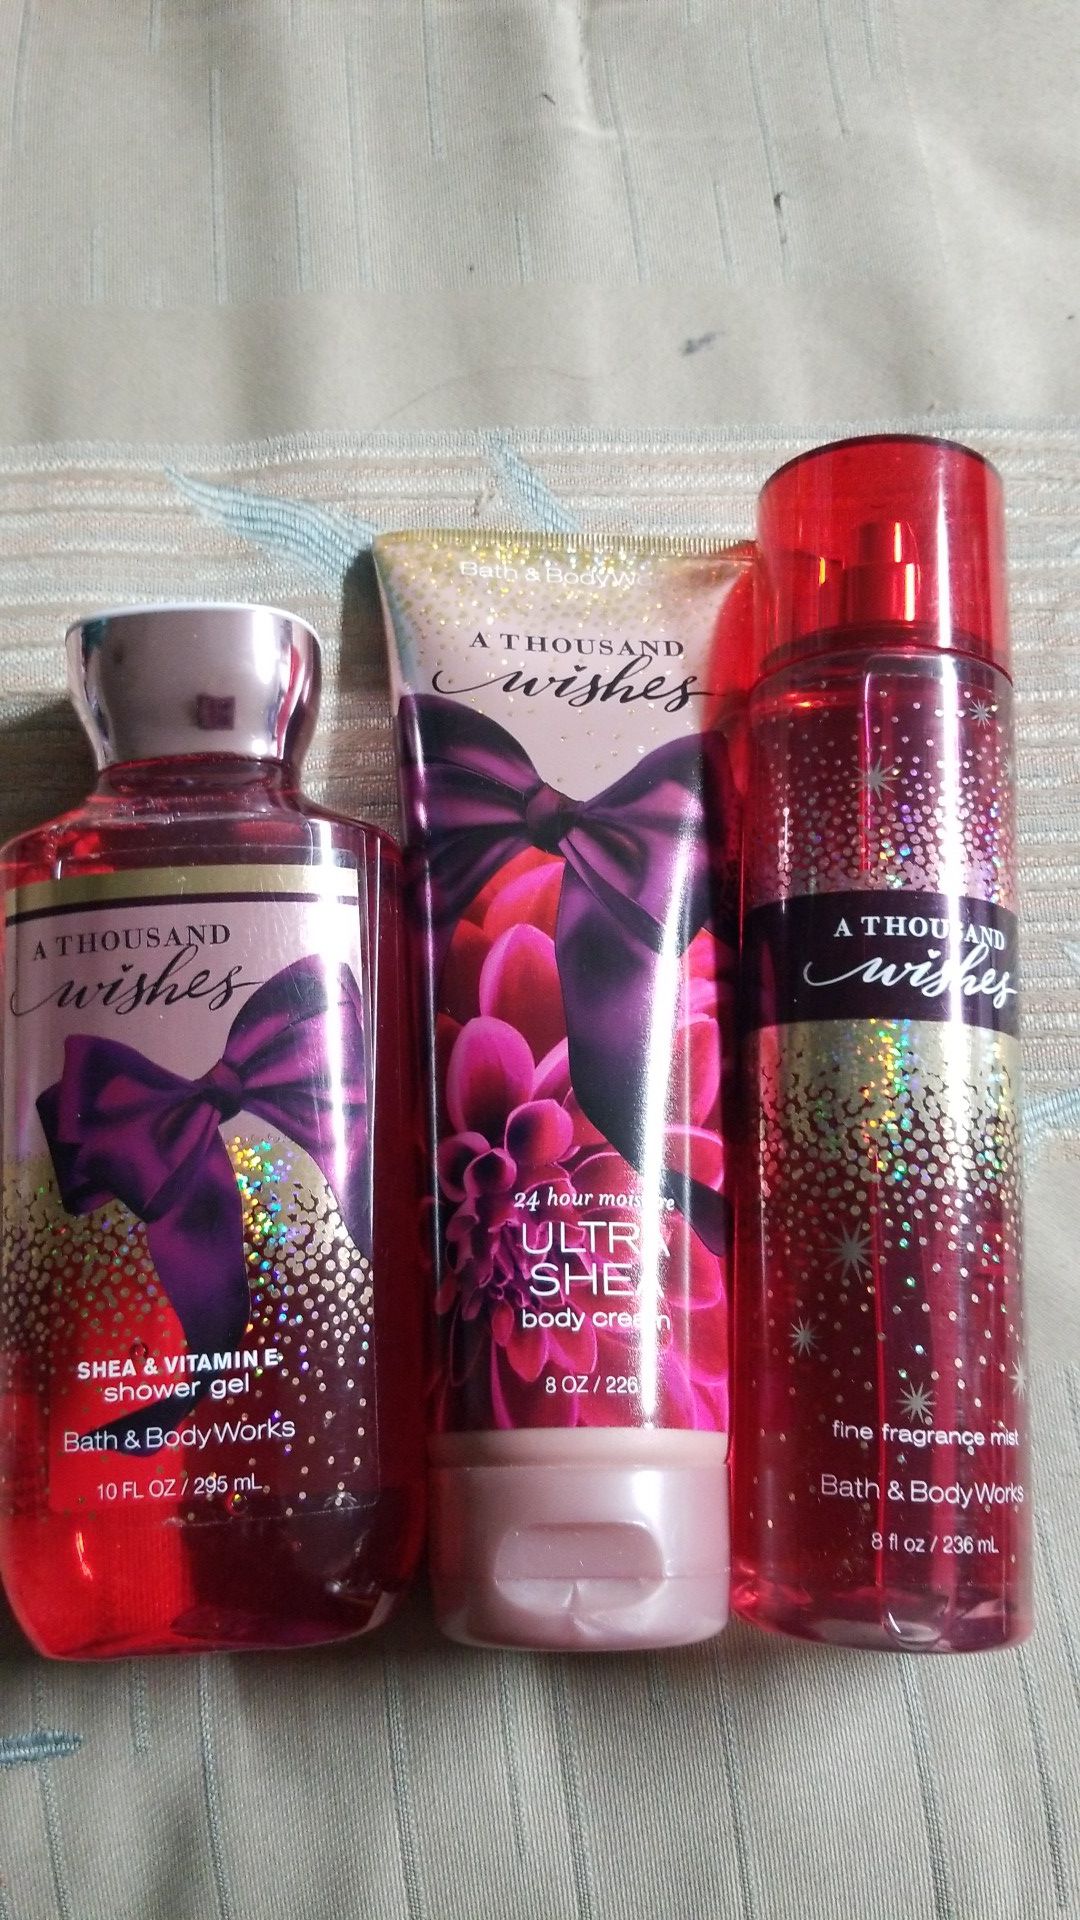 BATH AND BODY WORKS- A THOUSAND WISHES $25.00